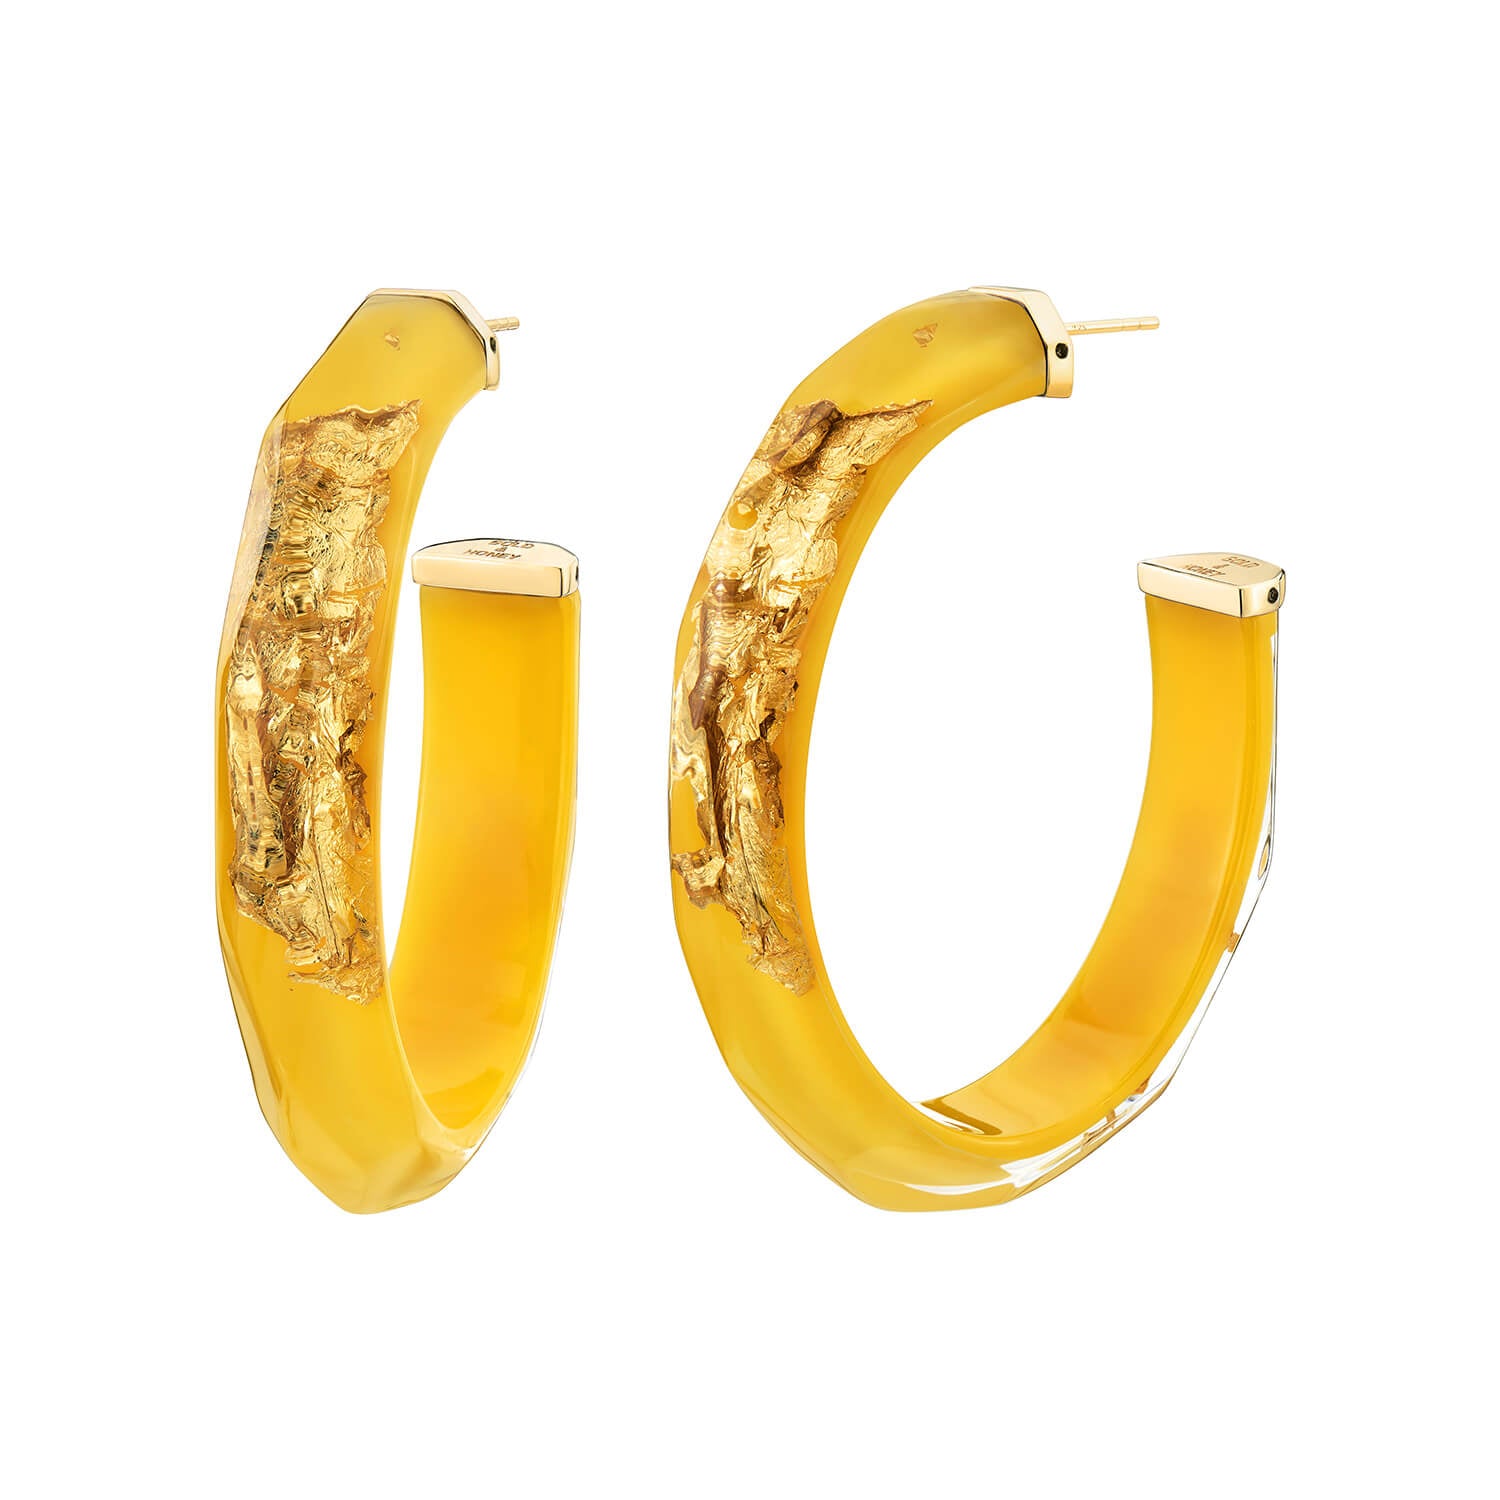 Large Faceted Gold Leaf Lucite Hoops in Neon